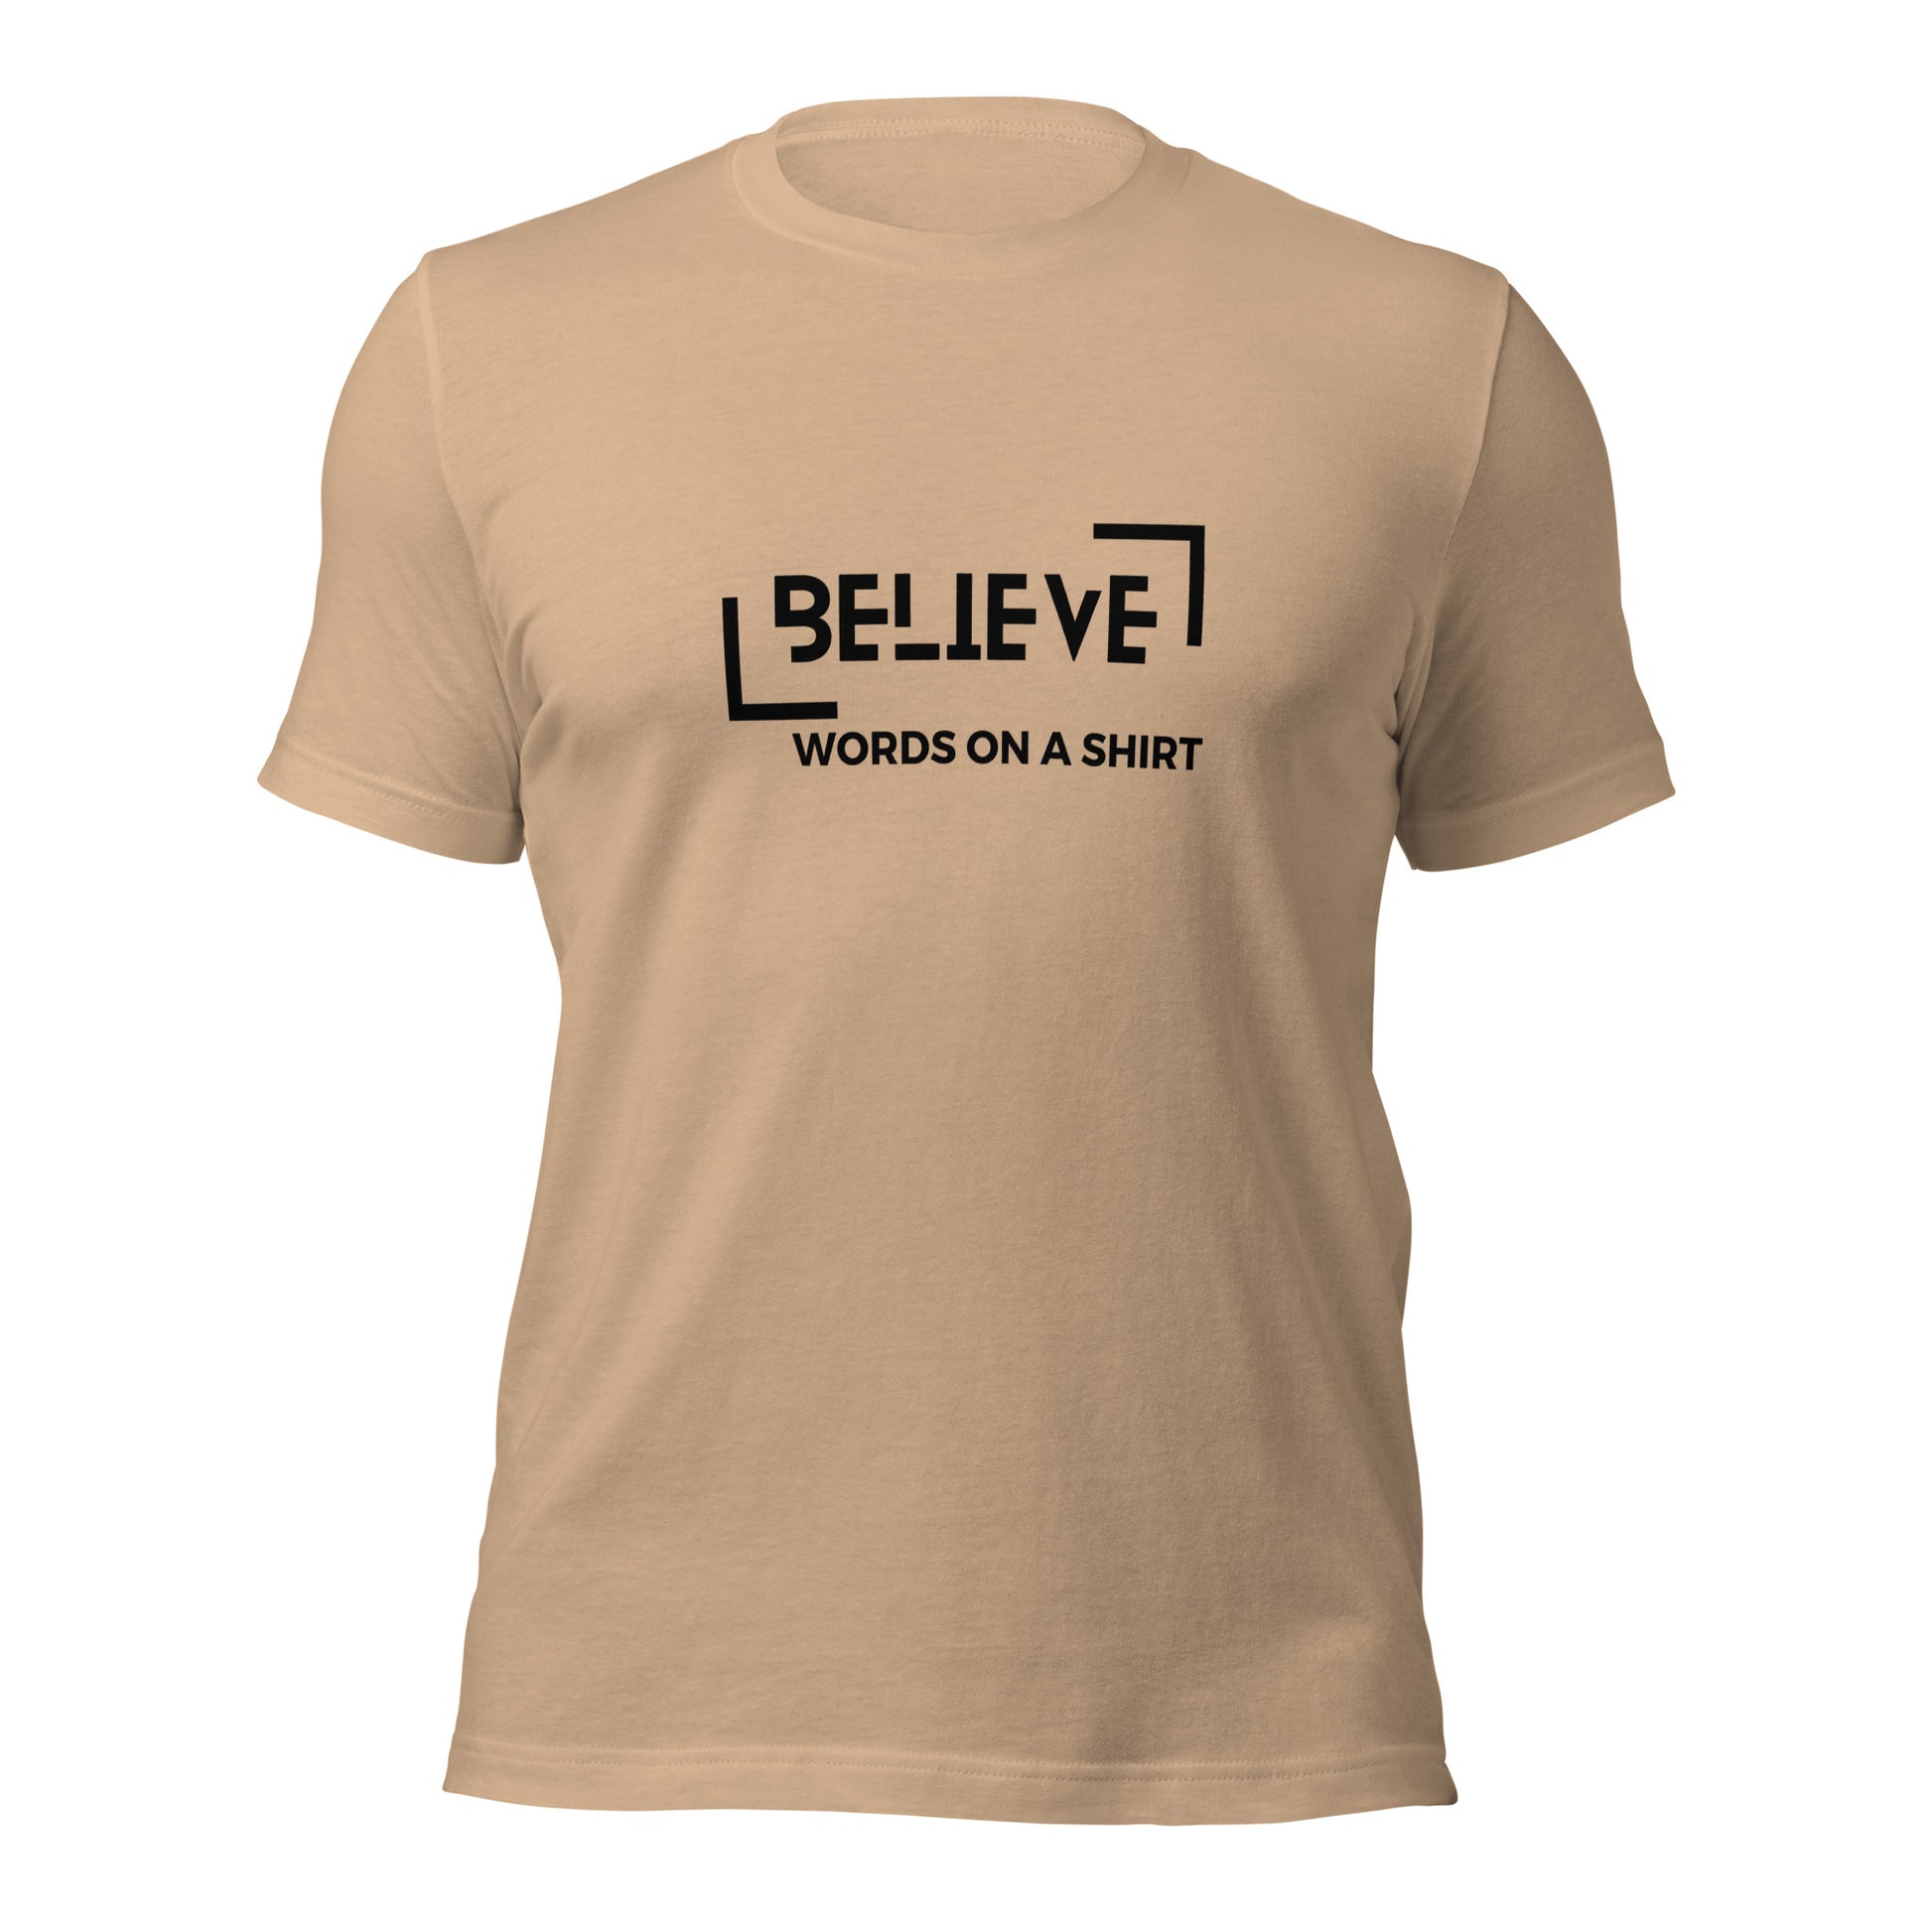 T-shirts are a dime a dozen, but this one stands out from the pack. It’s super soft, breathable, and has just the right amount of stretch. Need we say more? Believe!